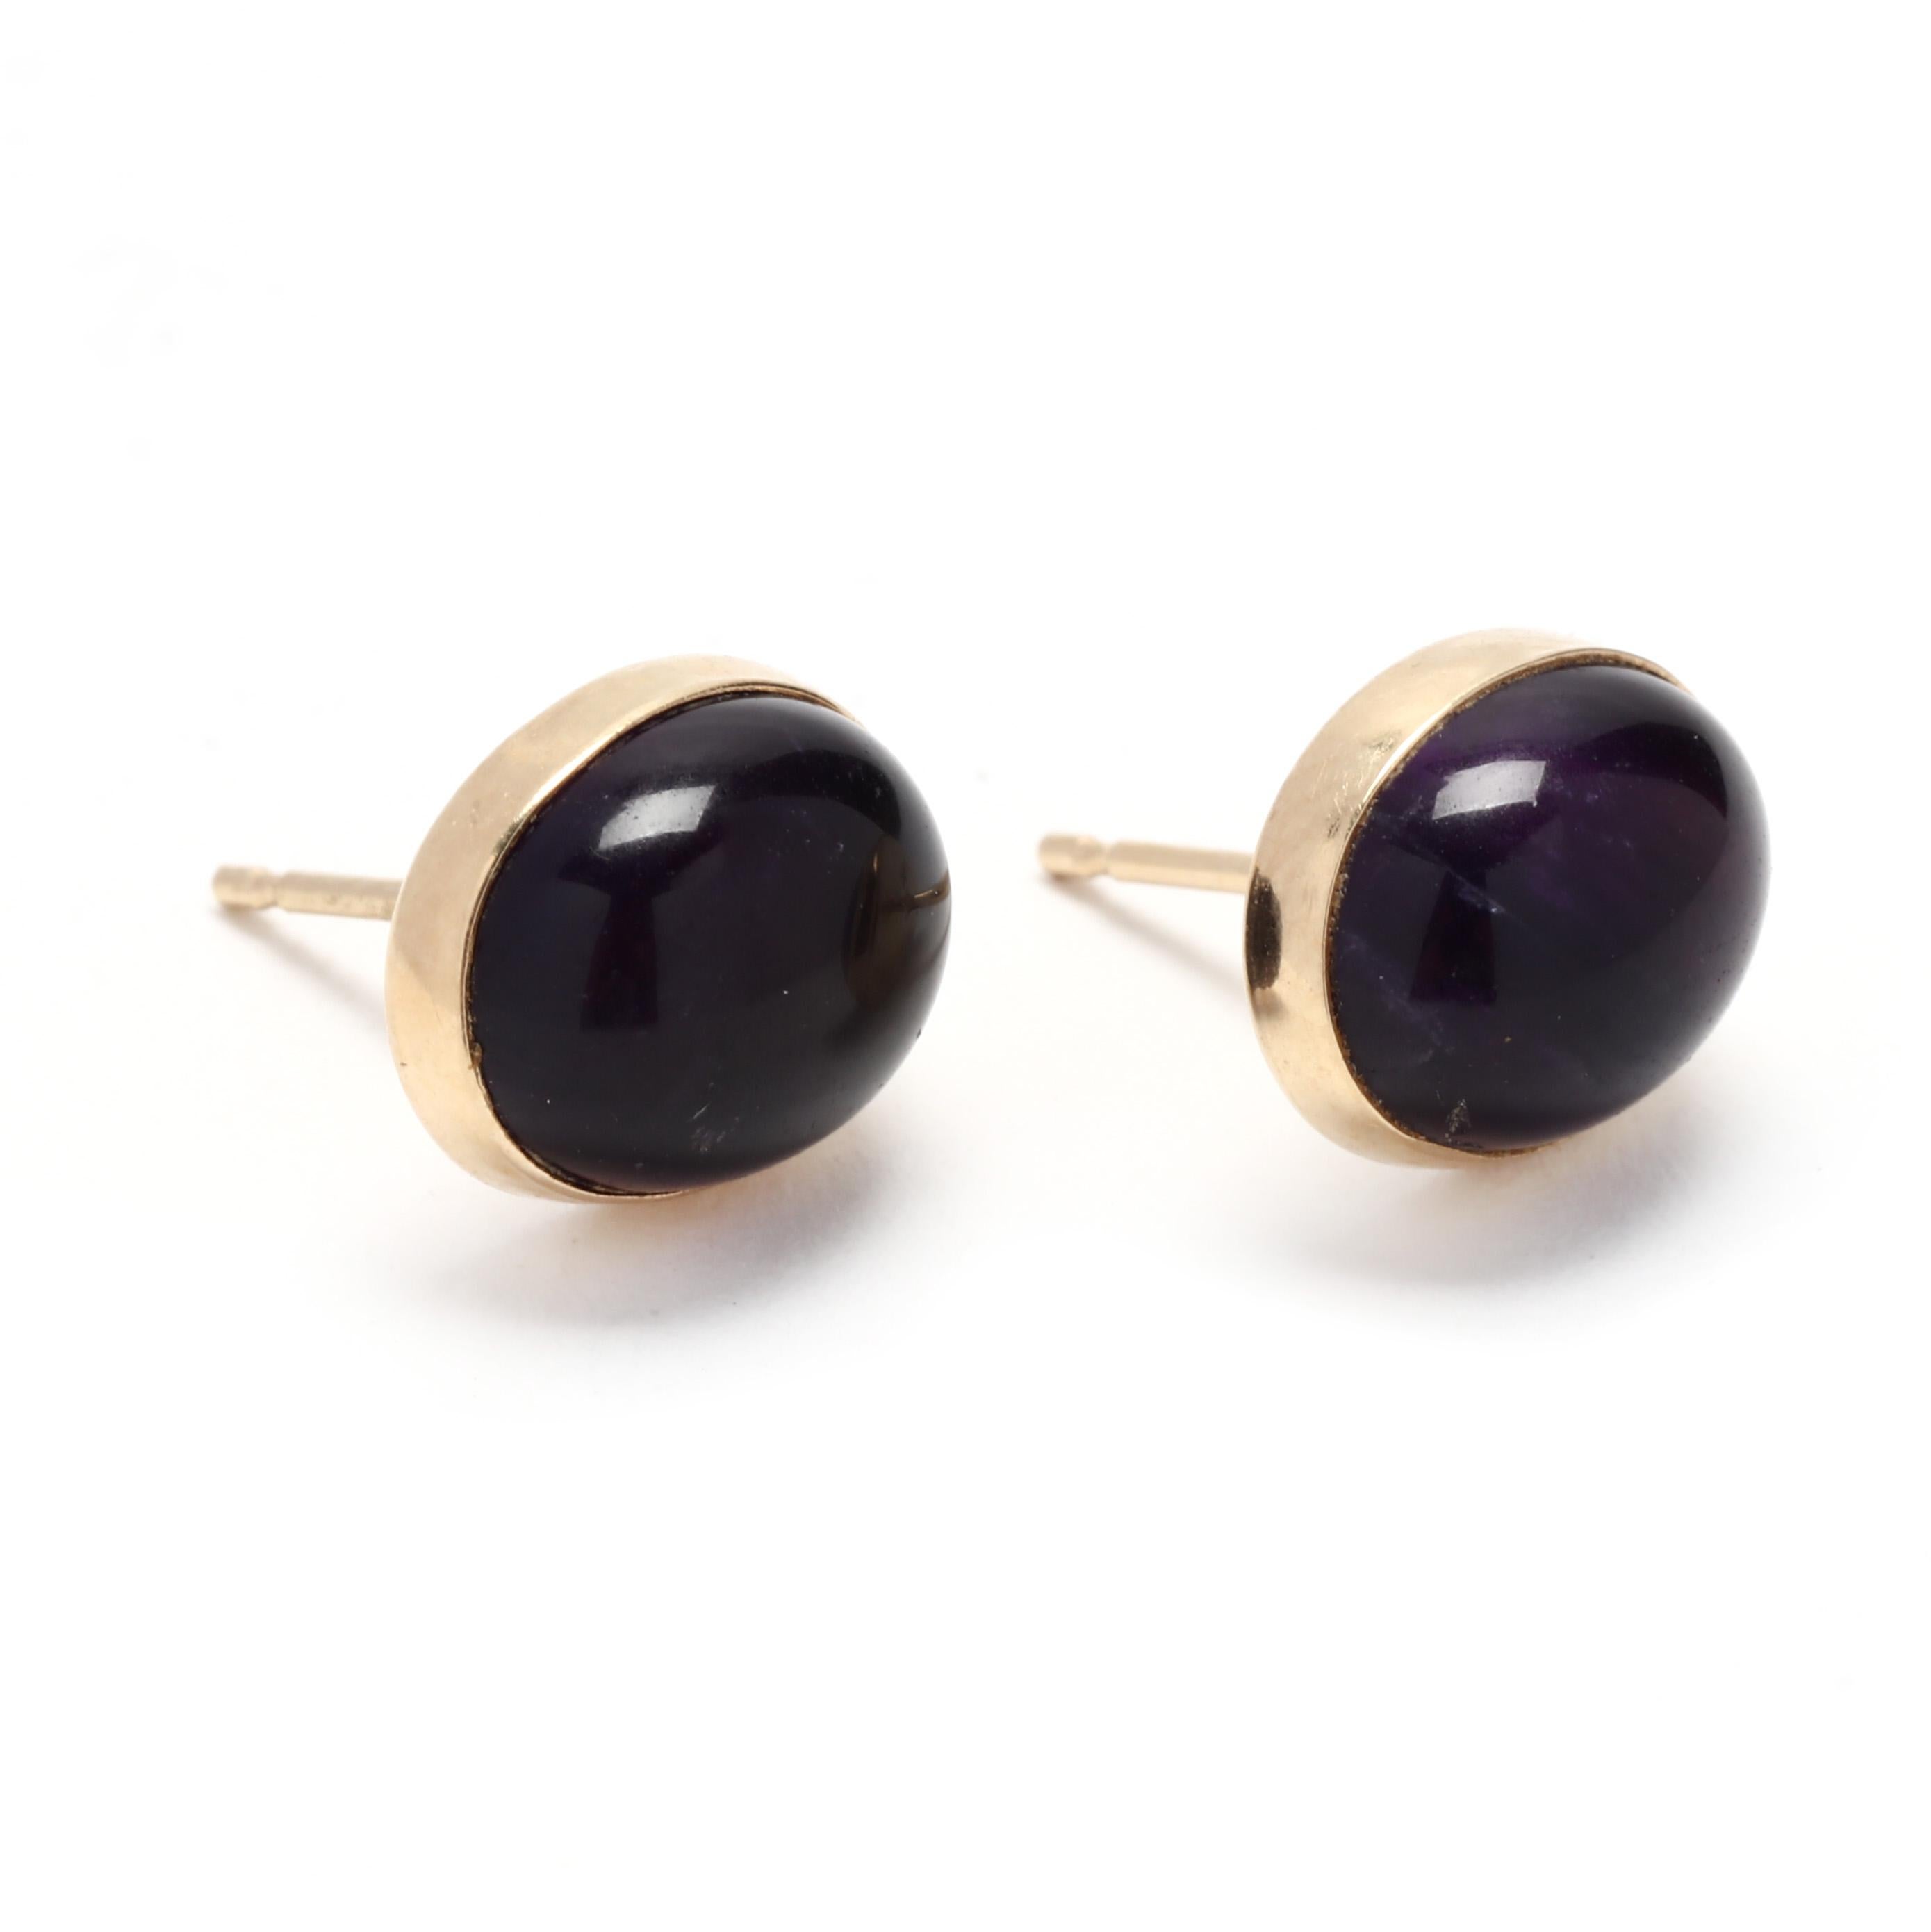 A pair of 14 karat yellow gold cabochon amethyst stud earrings. These February birthstone earrings feature bezel set, oval cabochon cut amethyst weighing approximately 6.90 total carats and with pierced push backs.

Stones:
- amethyst, 2 stones
-